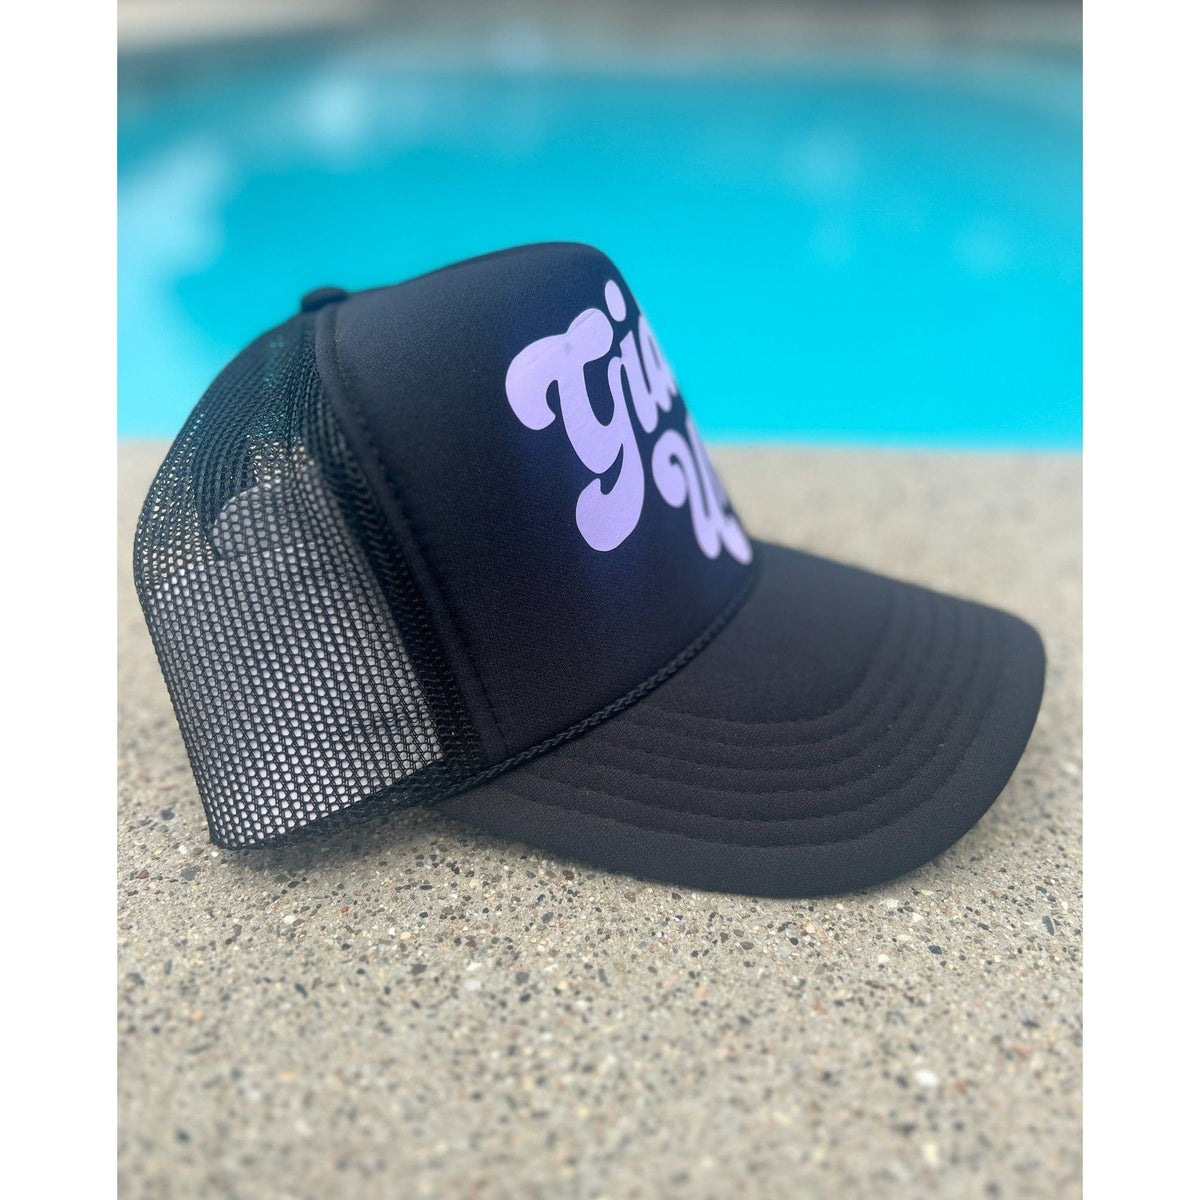 Giddy Up | Black Trucker Hat by Haute Sheet Hats TheFringeCultureCollective